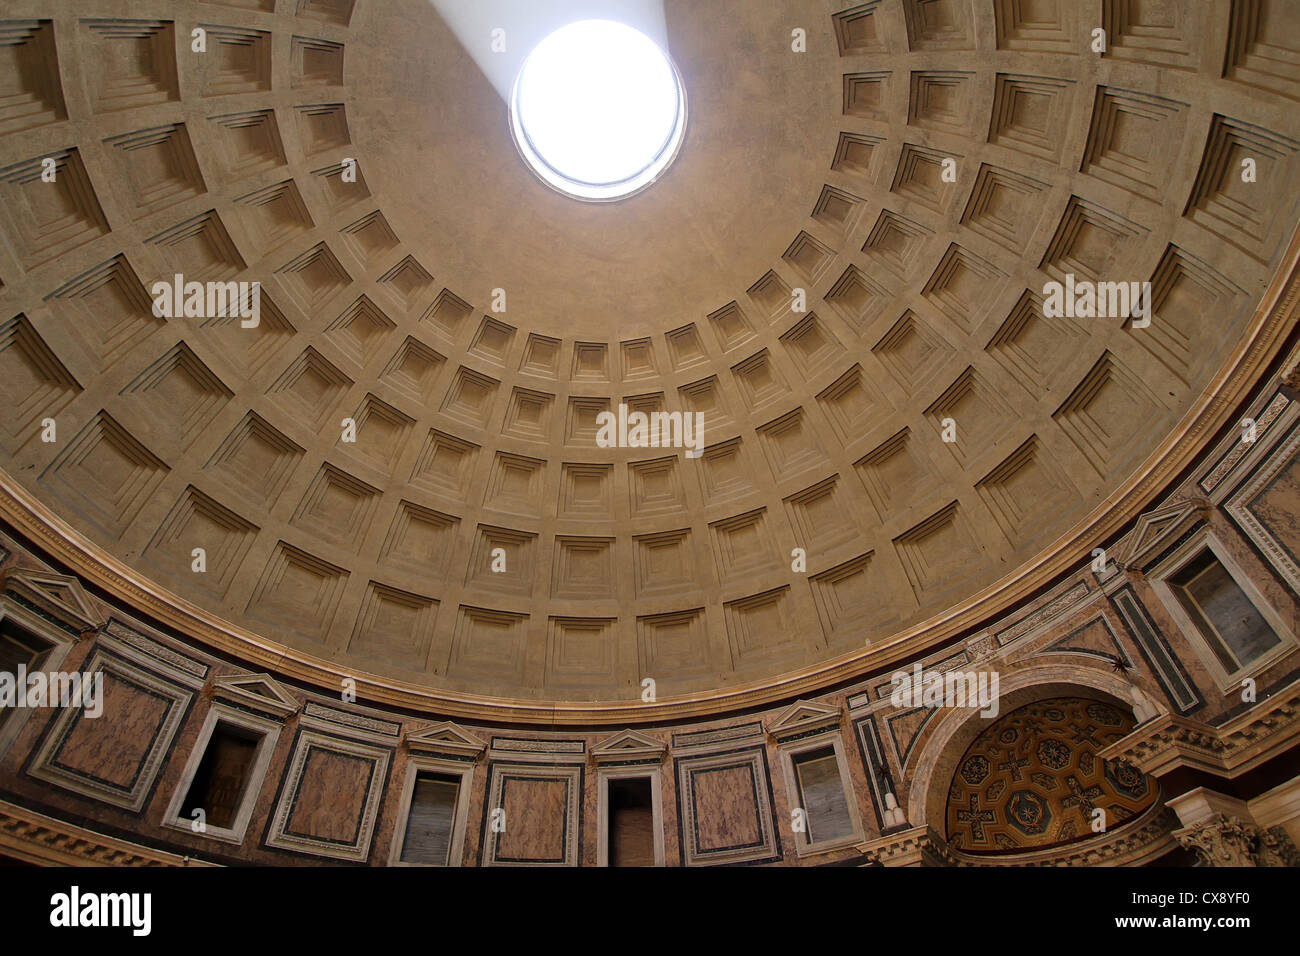 Interior of the Pantheon in Rome, Italy Stock Photo